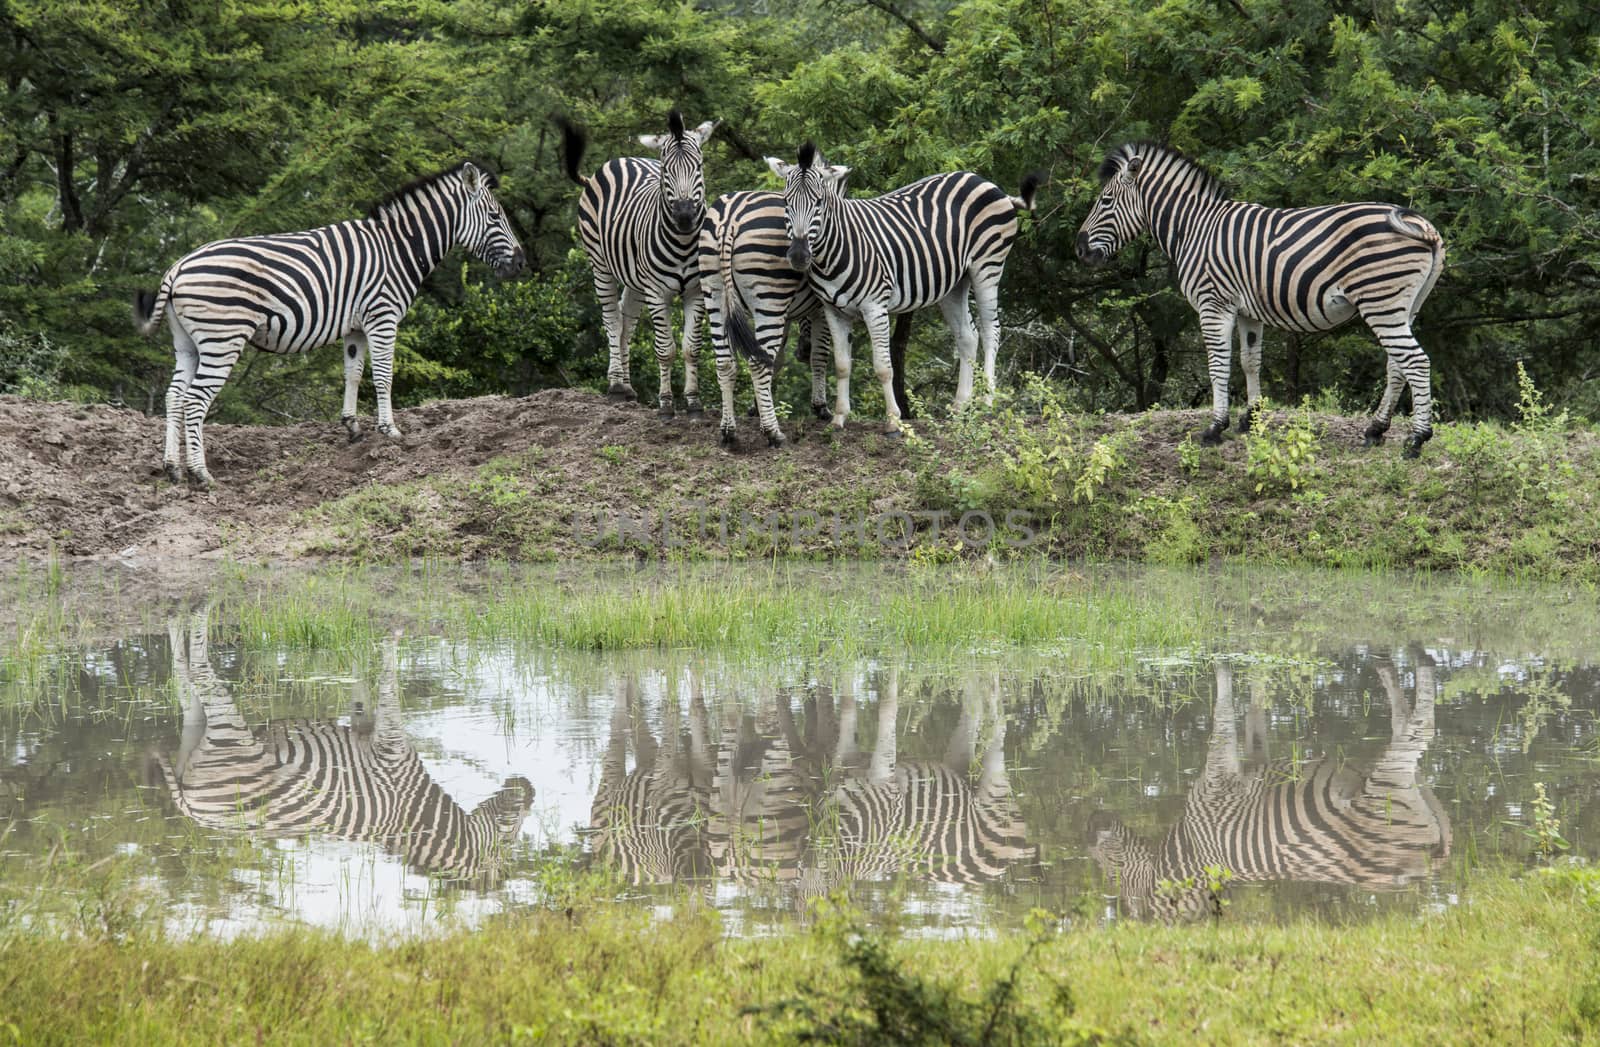 group of zebras in south africa in the wild nature by compuinfoto